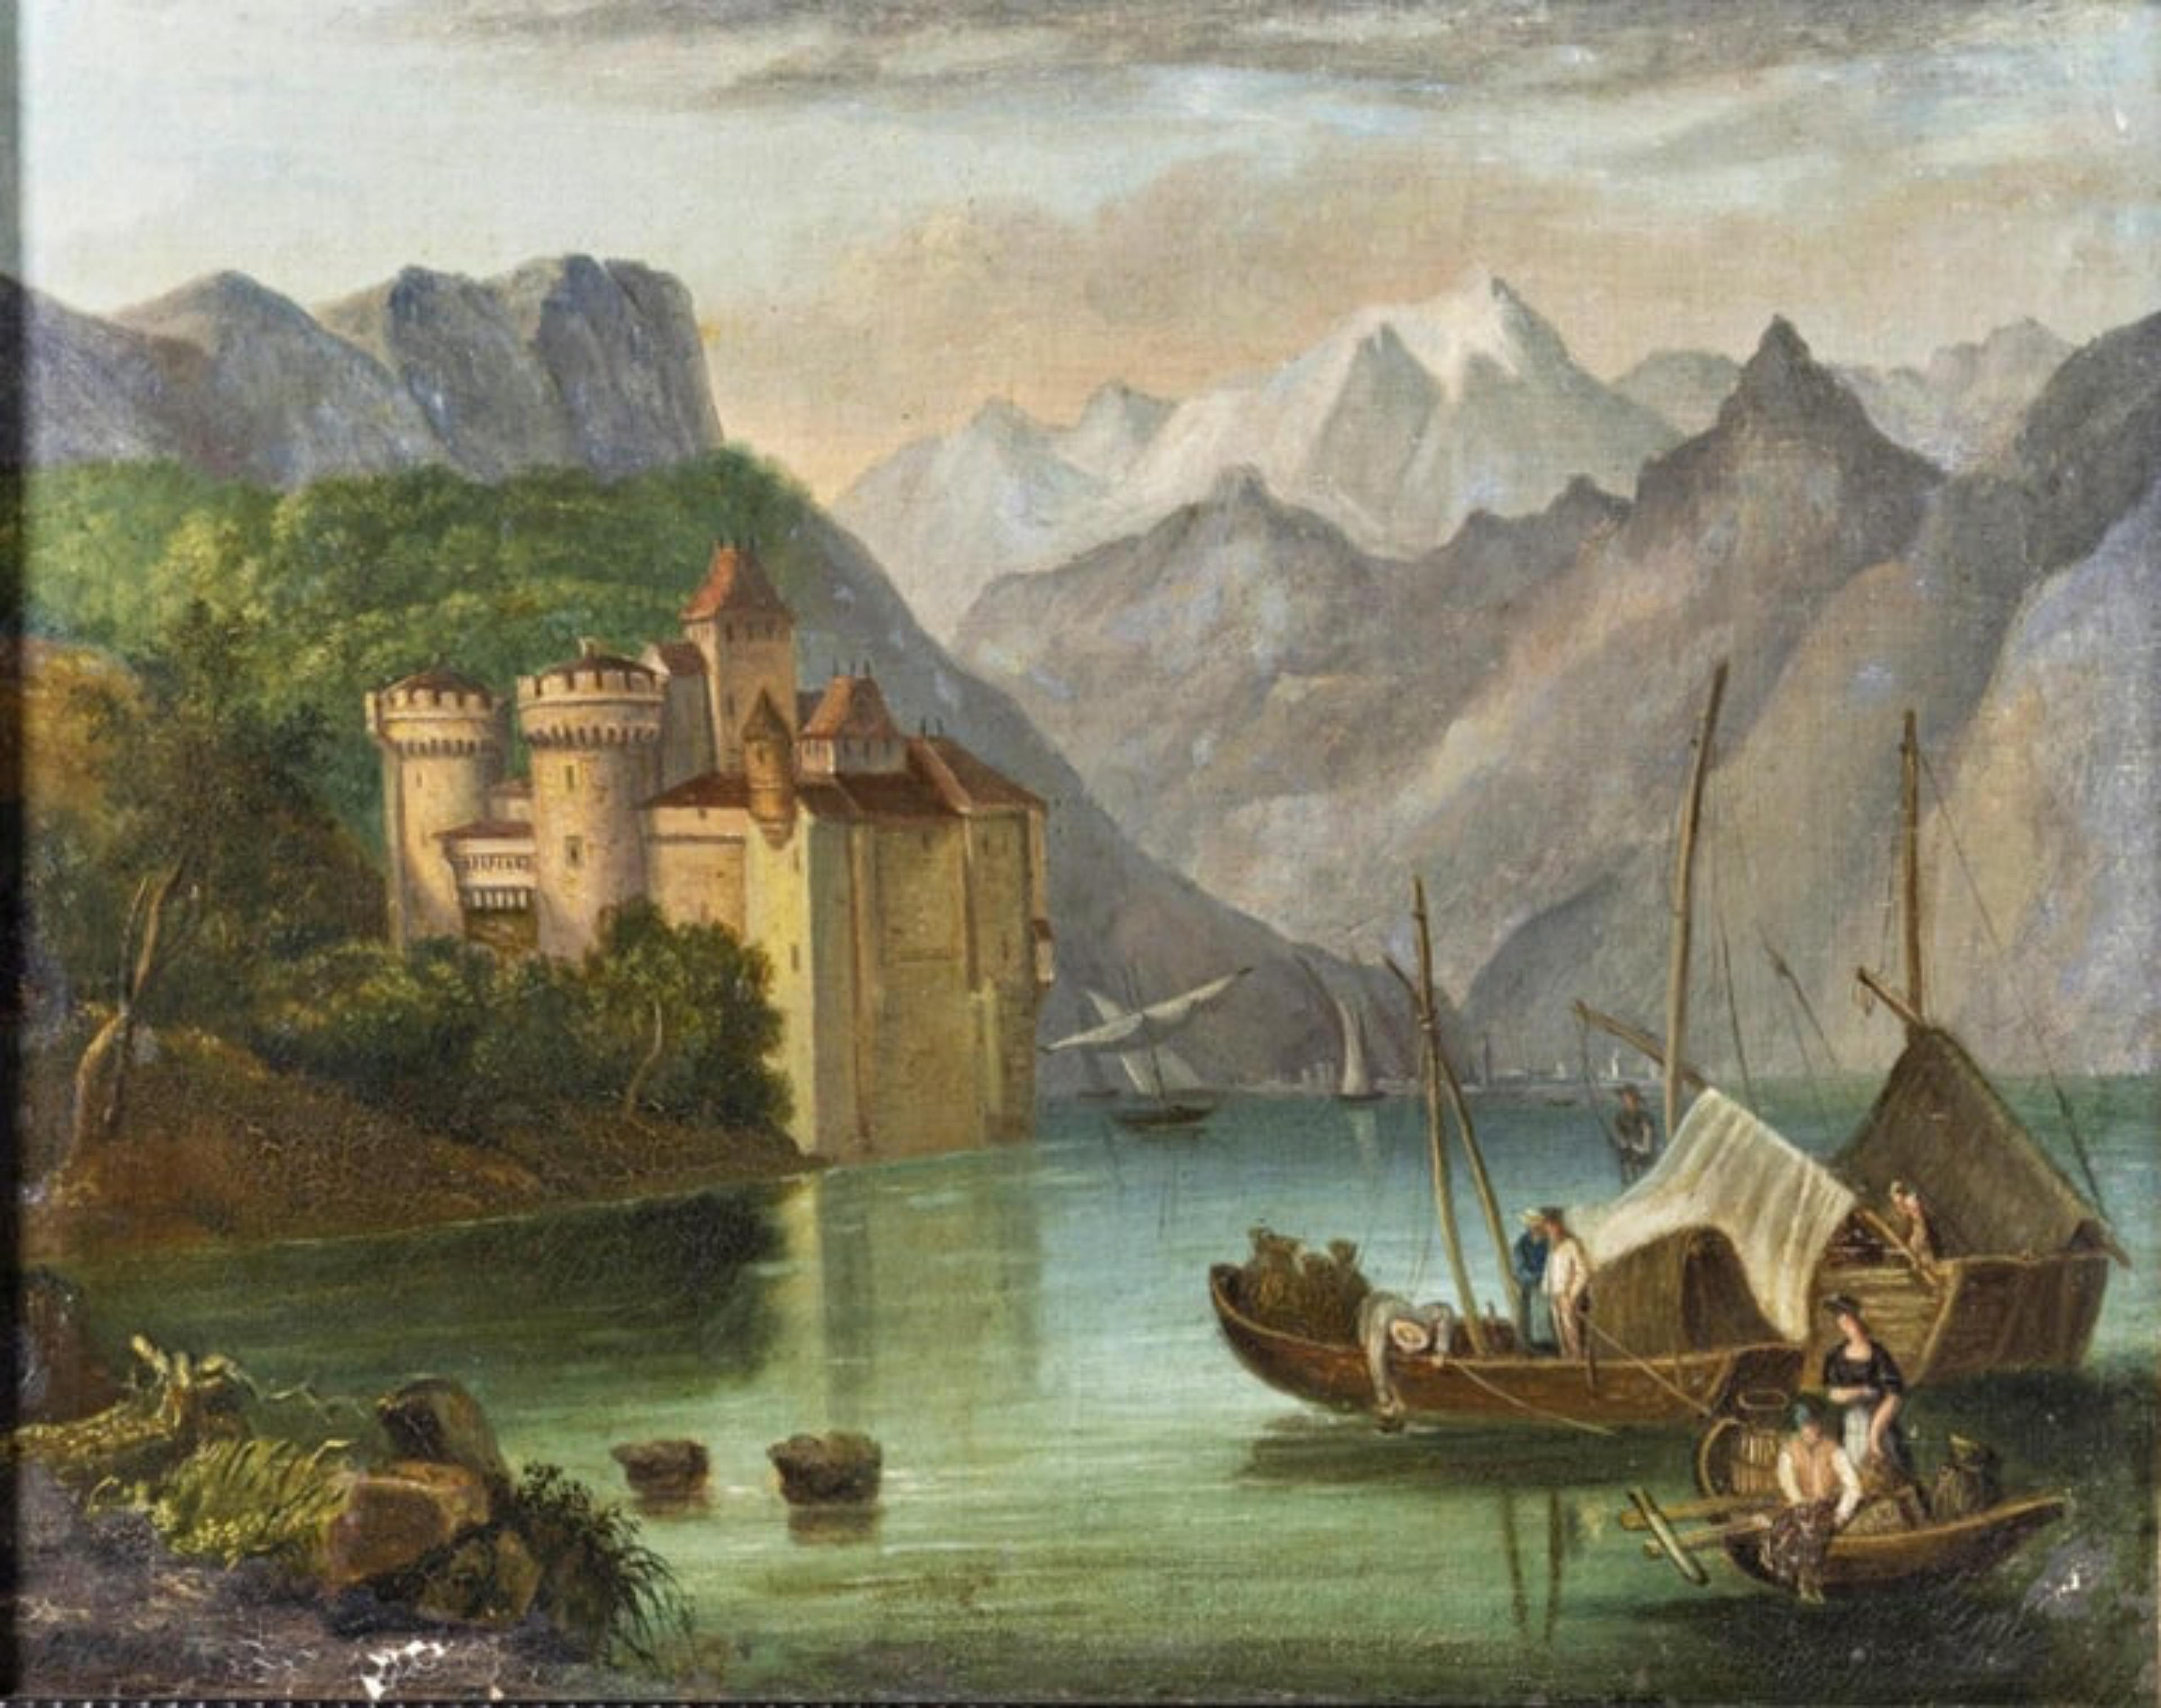 RIVER LANDSCAPE WITH CASTLE AND BOATS European School 19th Century

oil on wood,
19th century European school 
Small defects.
DIM.: 37 x 46 cm
good conditions.